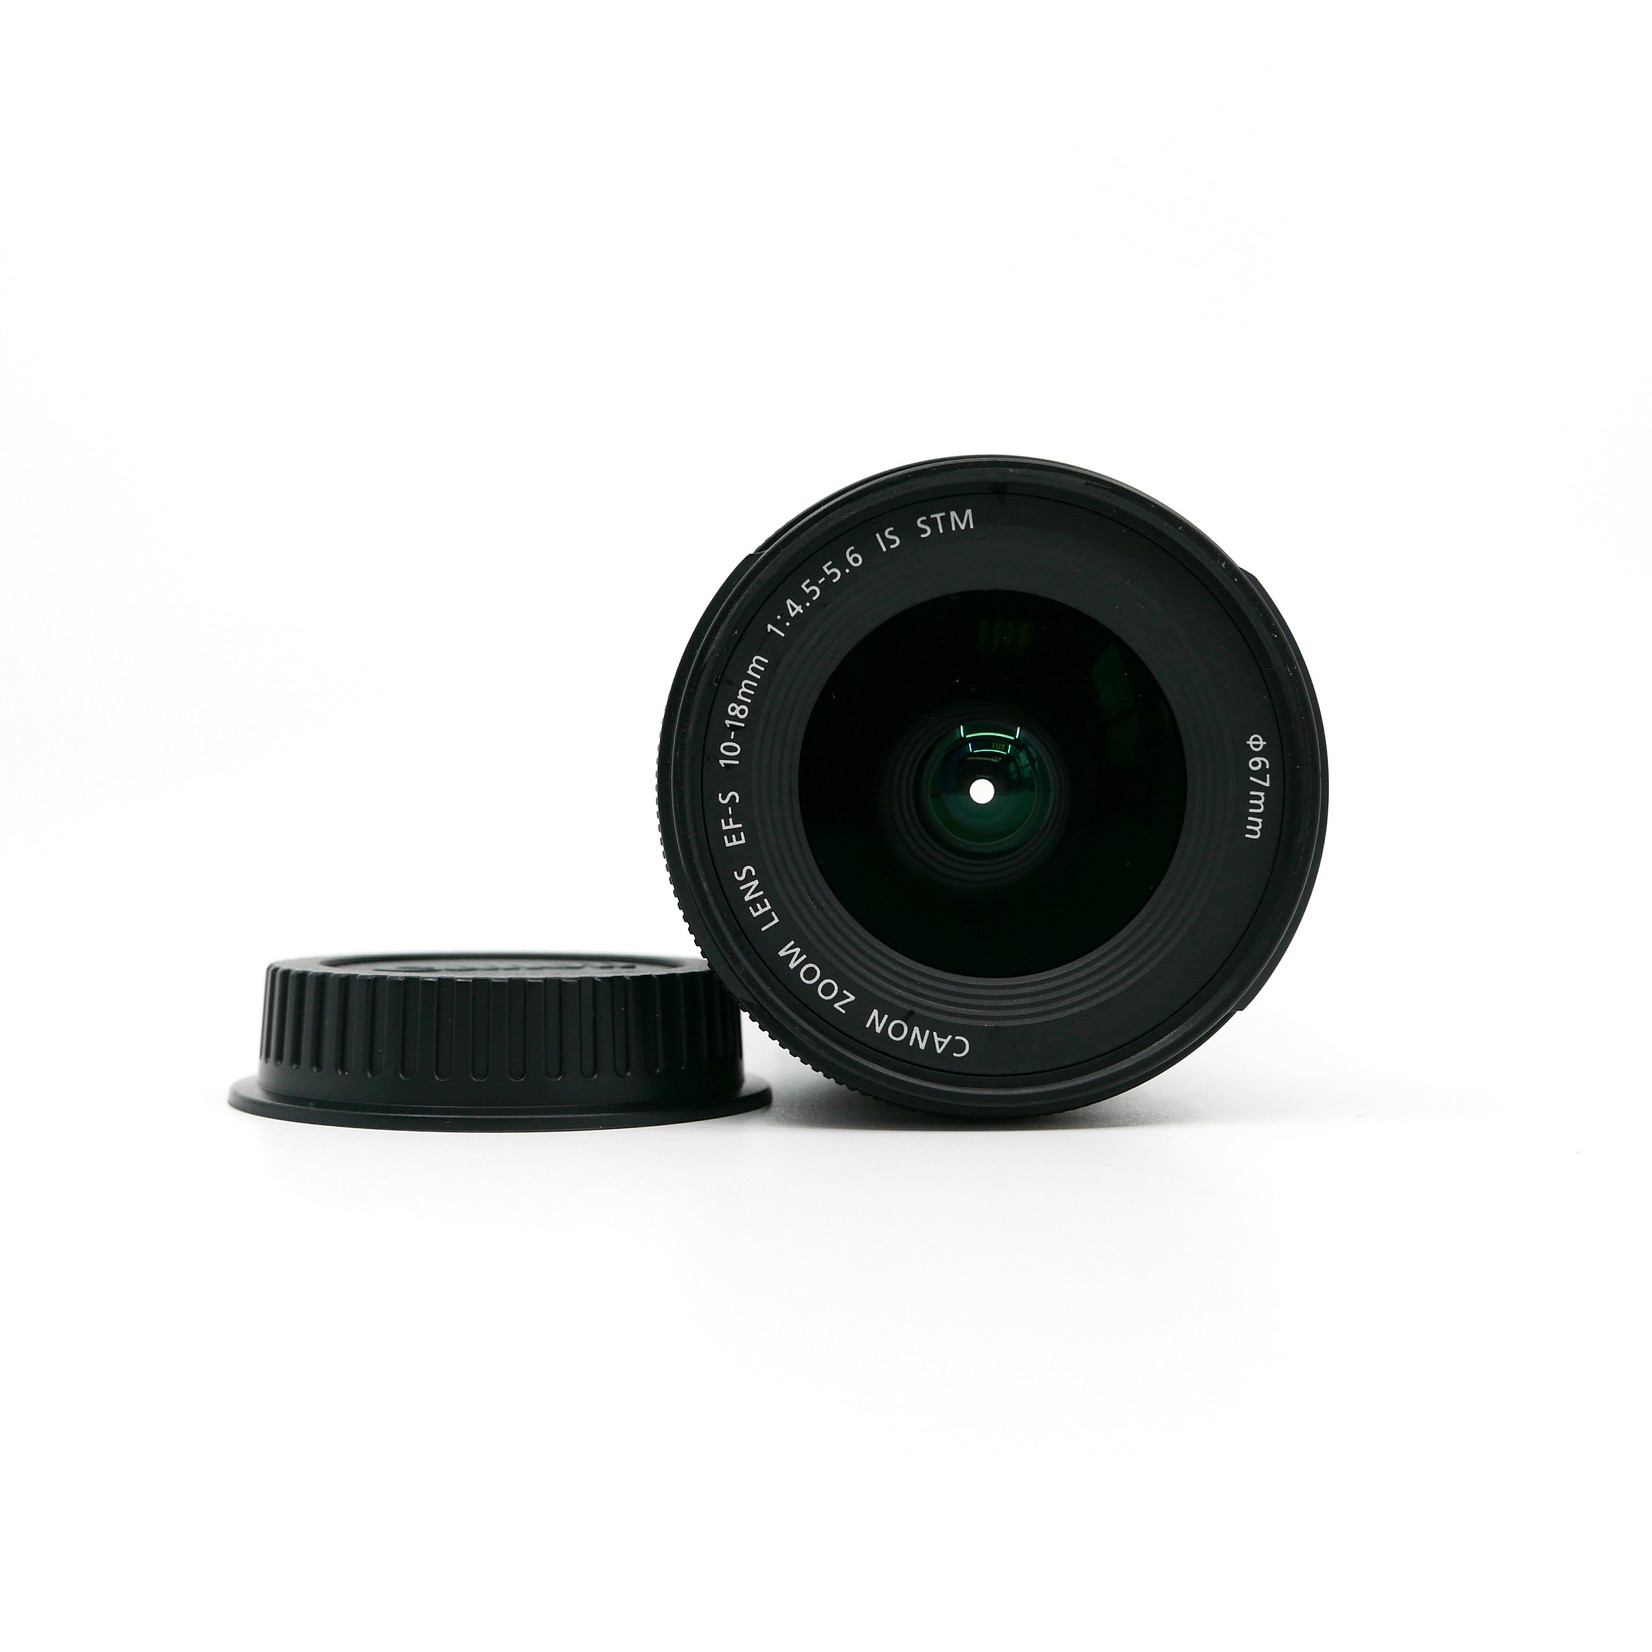 CANON EFS 10-18mm f/4.5-5.6 IS STM